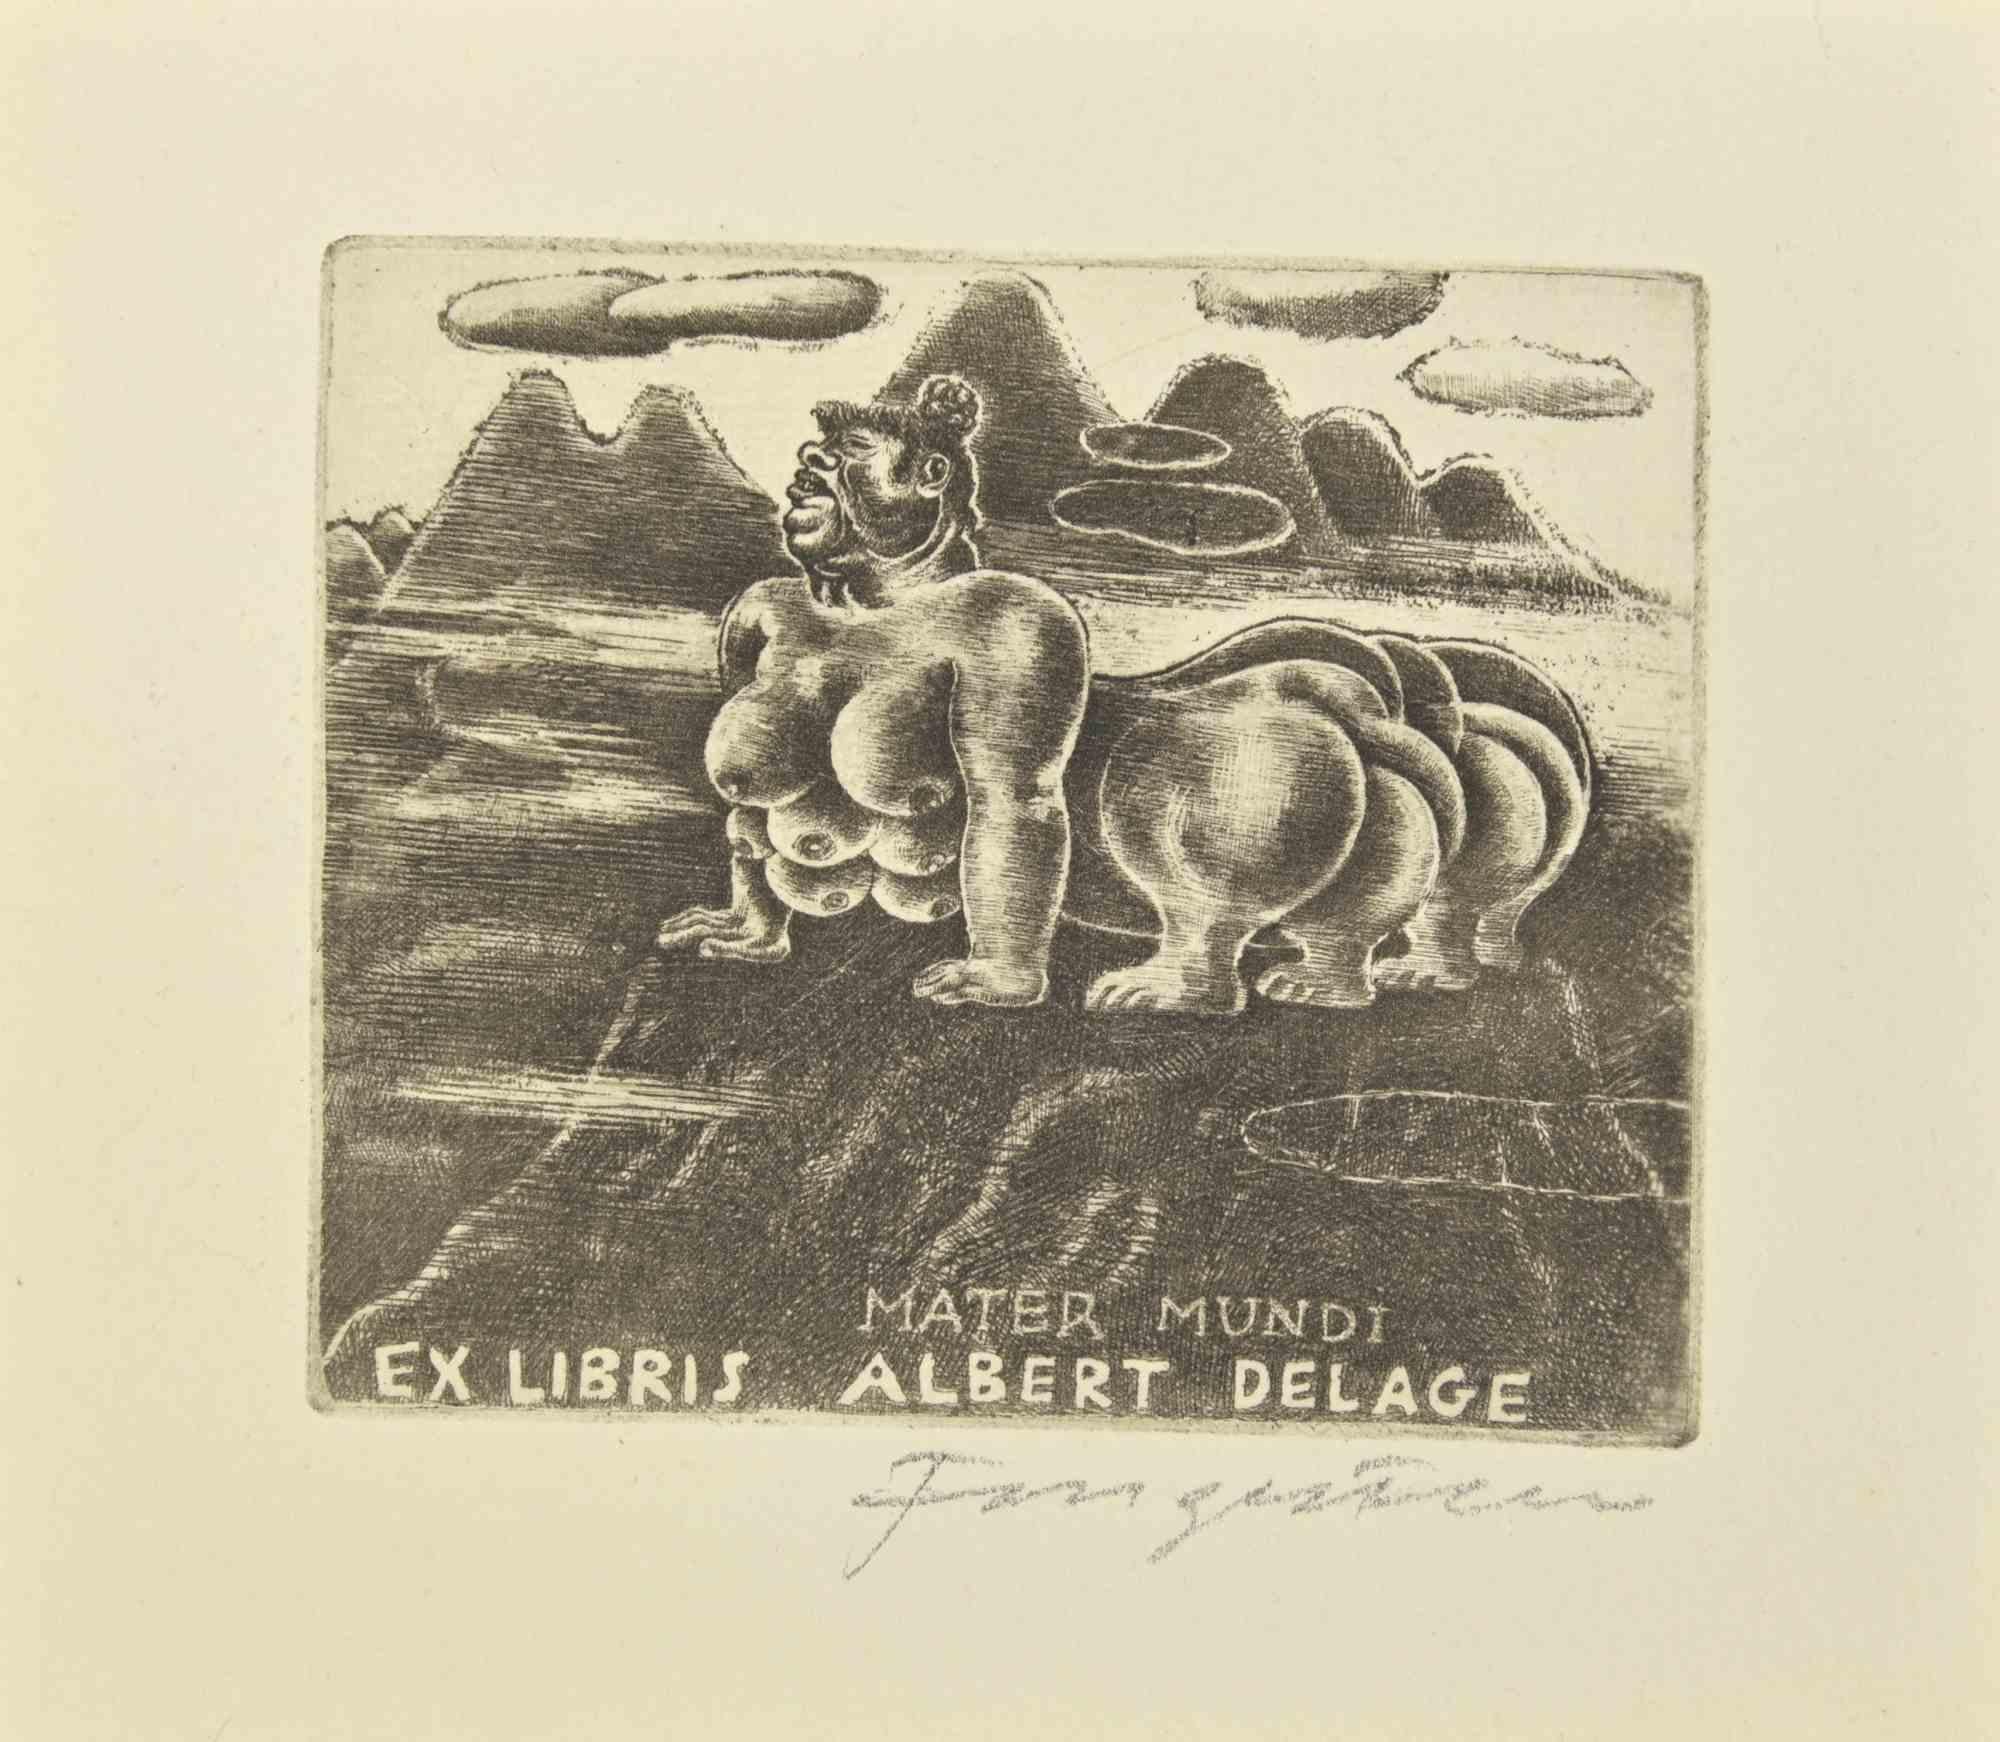 Ex Libris - Albert Delage is an Etching print created by  Michel Fingesten.

Hand signed on the lower margin.

Good conditions.

Michel Fingesten (1884 - 1943) was a Czech painter and engraver of Jewish origin. He is considered one of the greatest